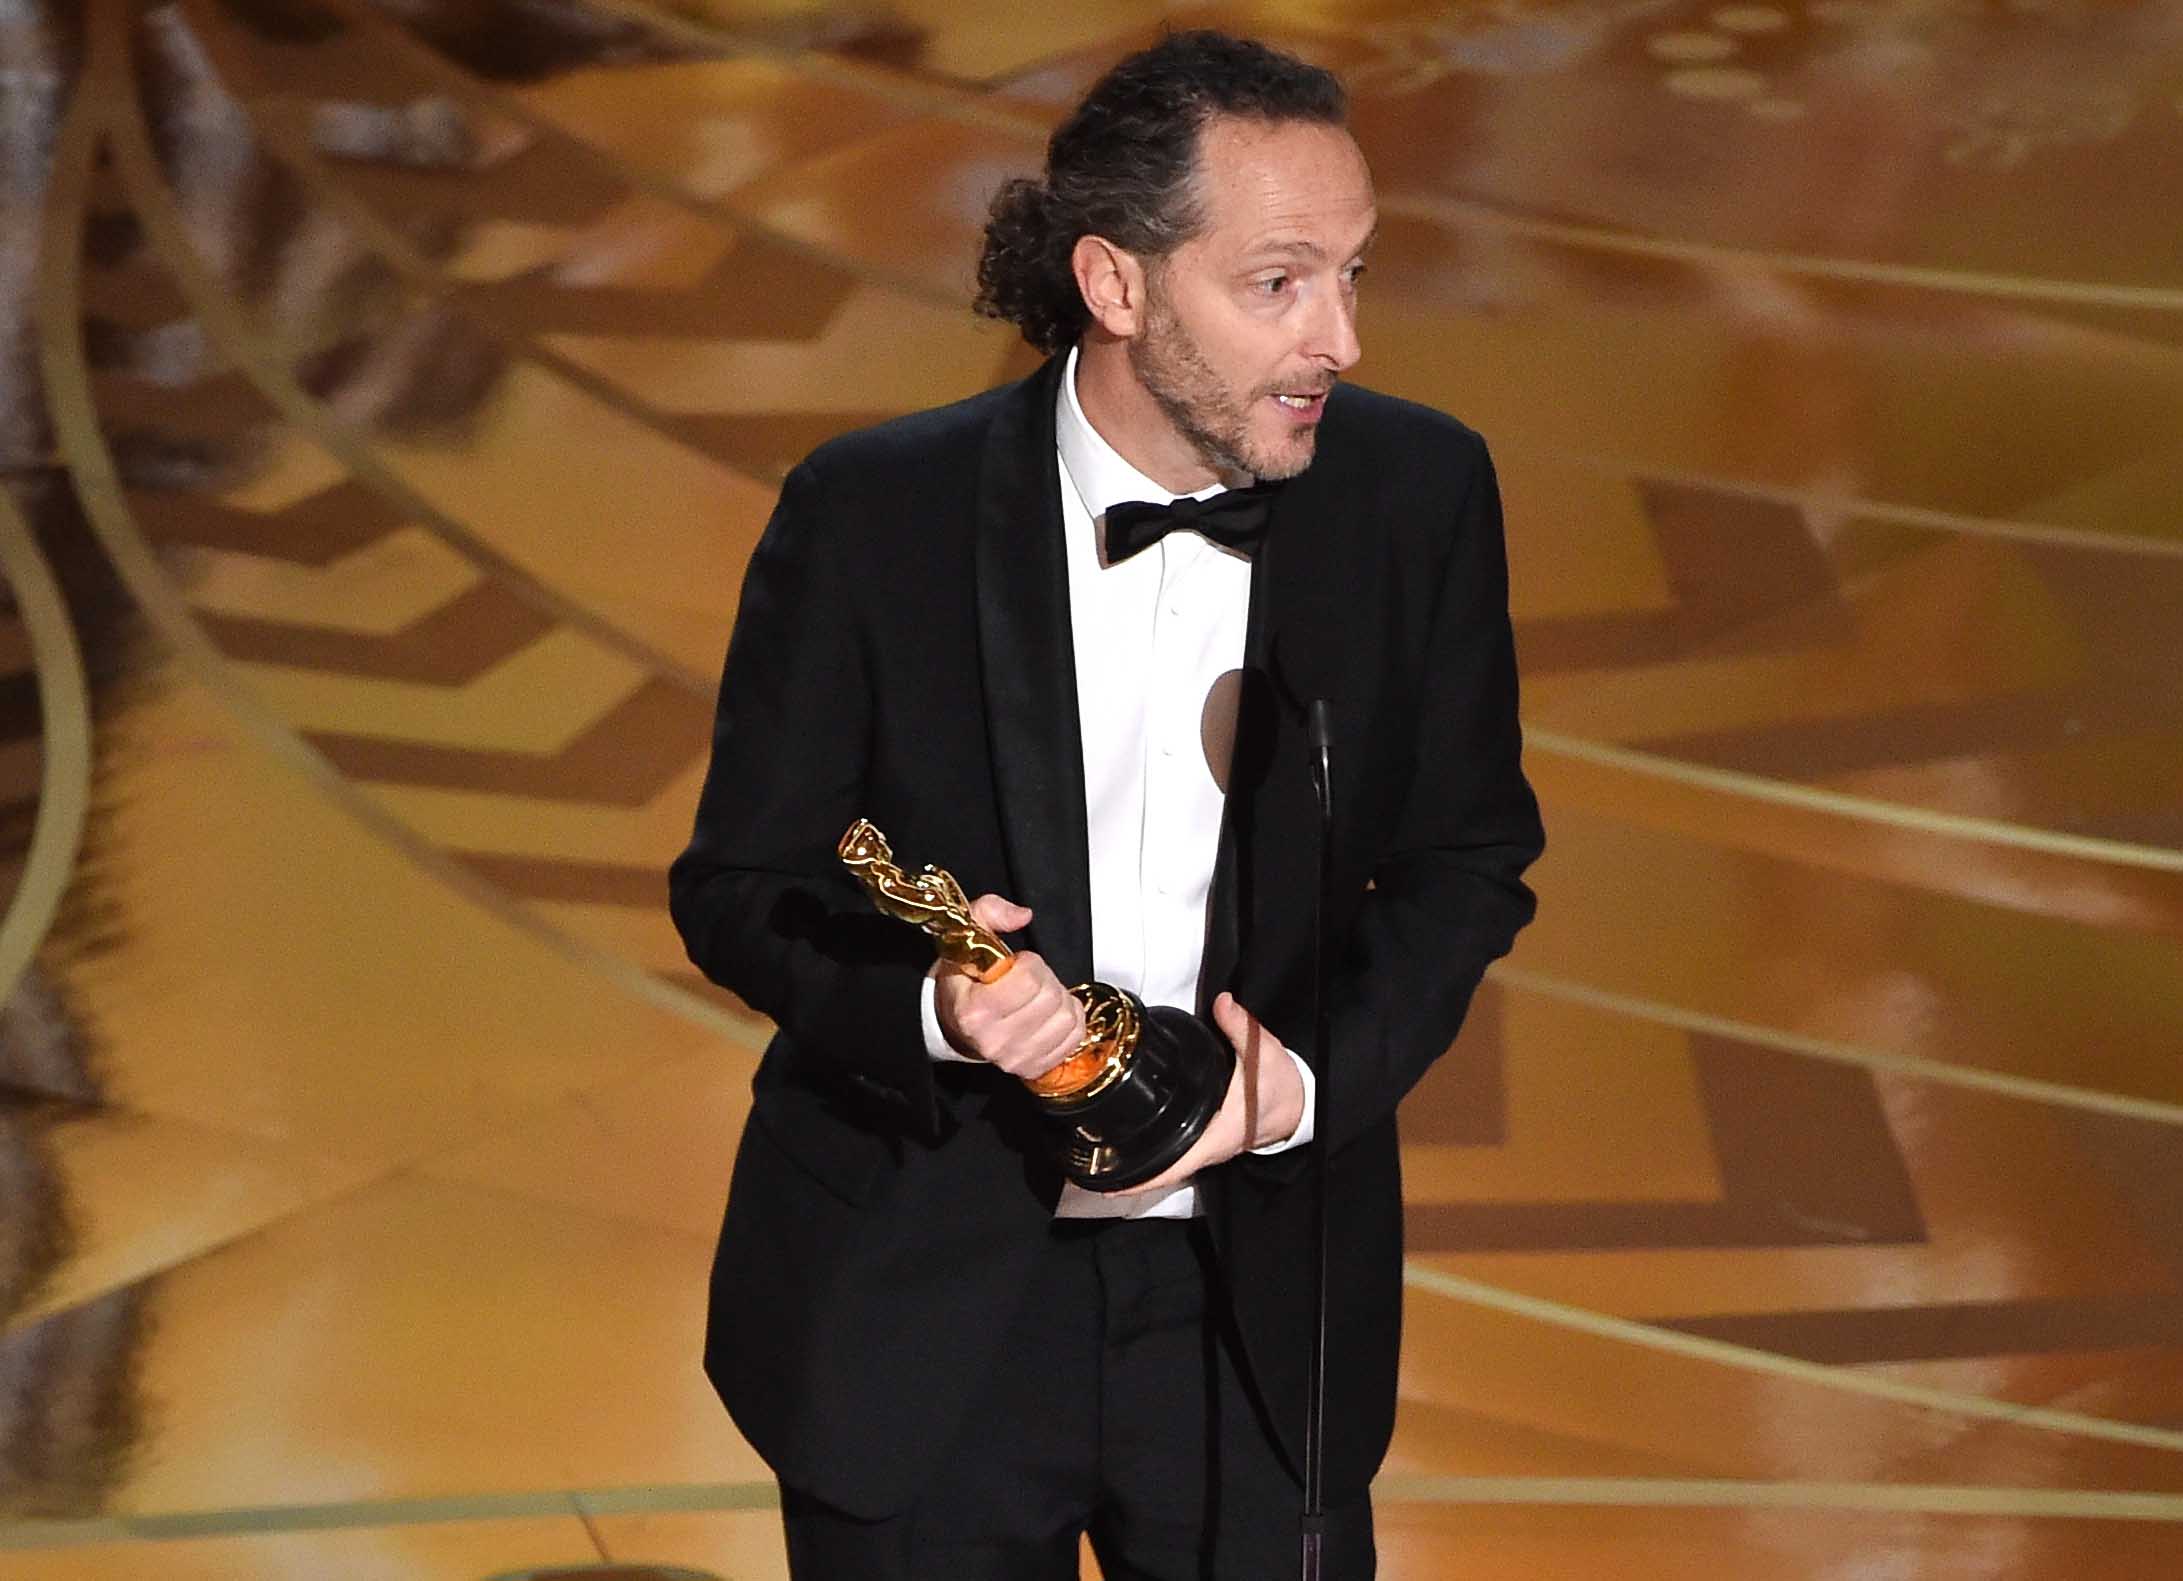 HOLLYWOOD, CA - FEBRUARY 28: Cinematographer Emmanuel Lubezki accepts the Best Cinematography award for 'The Revenant' onstage during the 88th Annual Academy Awards at the Dolby Theatre on February 28, 2016 in Hollywood, California. (Photo by Kevin Winter/Getty Images)